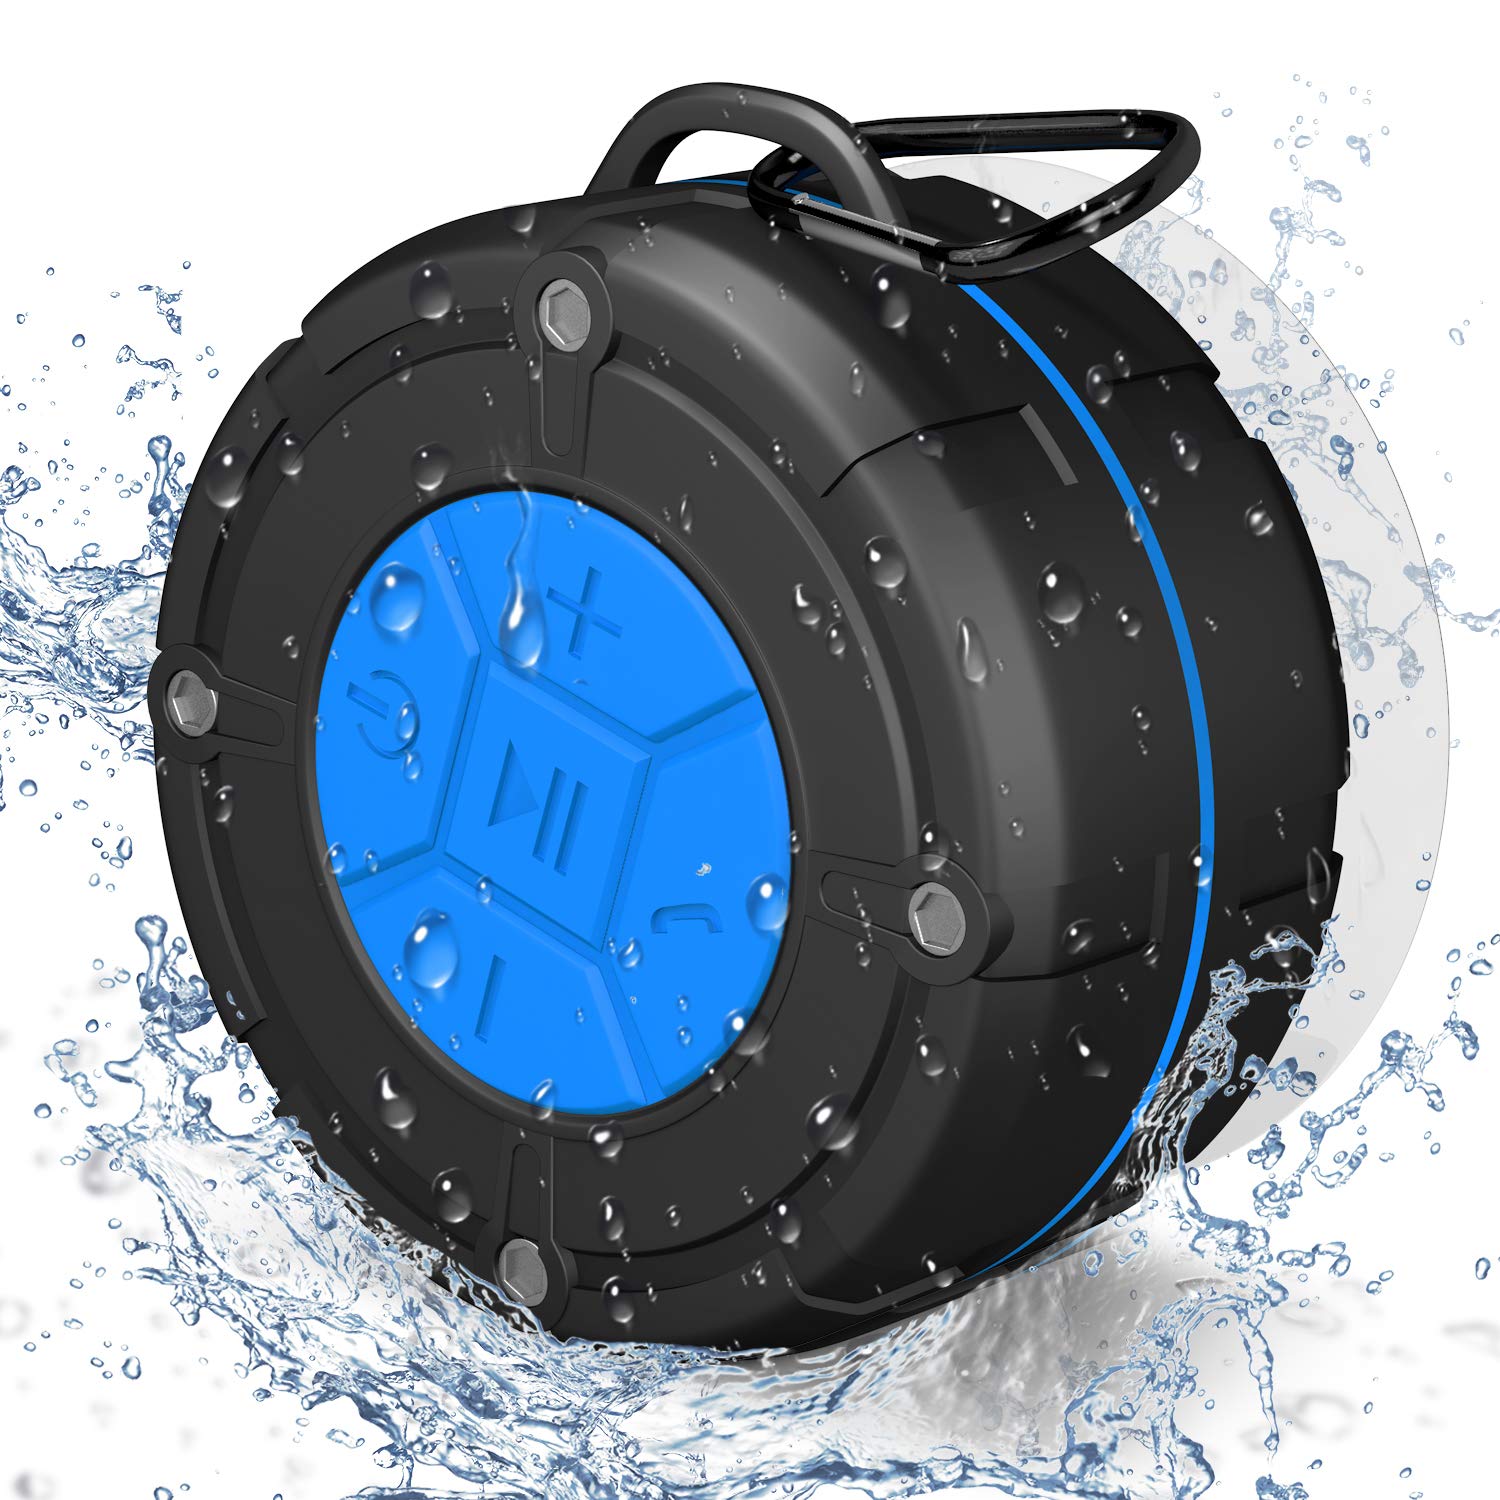 Shower Speaker Bluetooth 5.0, Peyou IPX7 Waterproof Bathroom Shower Radio, Portable Wireless Speaker with Suction Cup, Lould Voice and Rich Bass, Built-in Mic, Mini Speaker Perfect for Outdoor/Gift